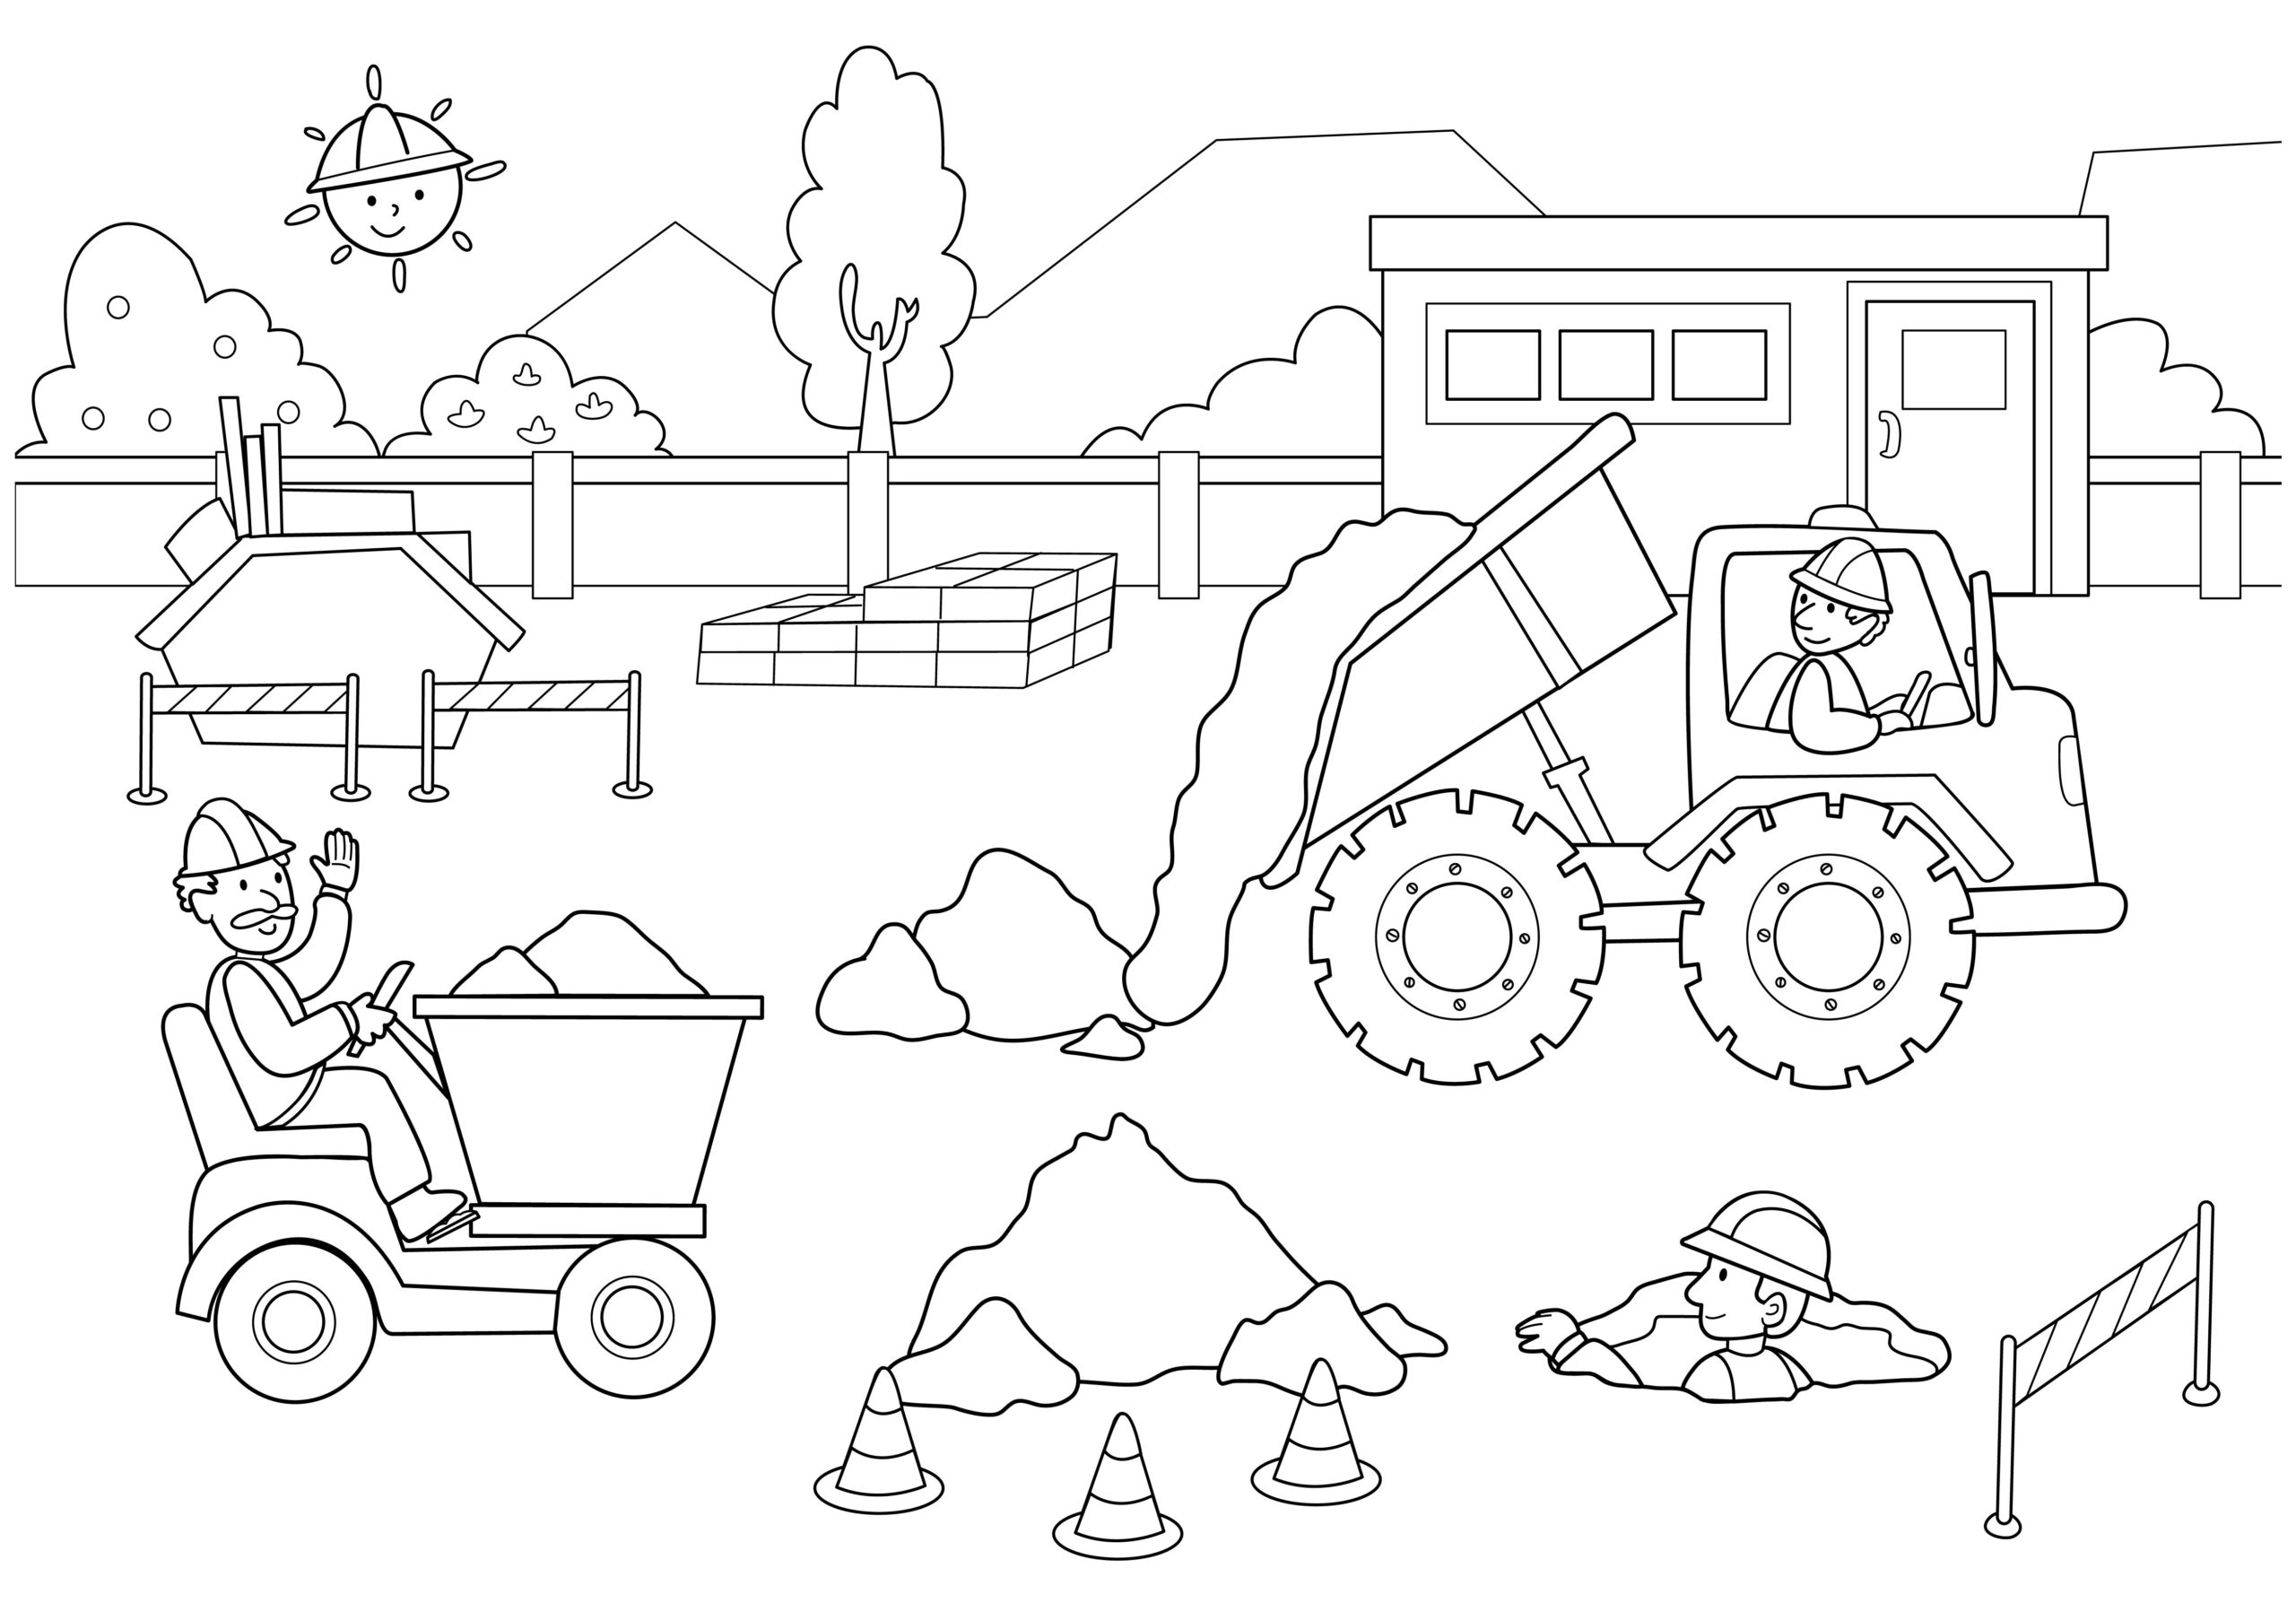 Coloring ~ Amazing Construction Coloring Pages Photo Inspirations Page  Theme Amazing Construction Coloring Pages Photo Inspirations. Construction  Hat Coloring Pages For Preschool. Printable Coloring Pages For Kids.  Construction Hat Coloring Pages.